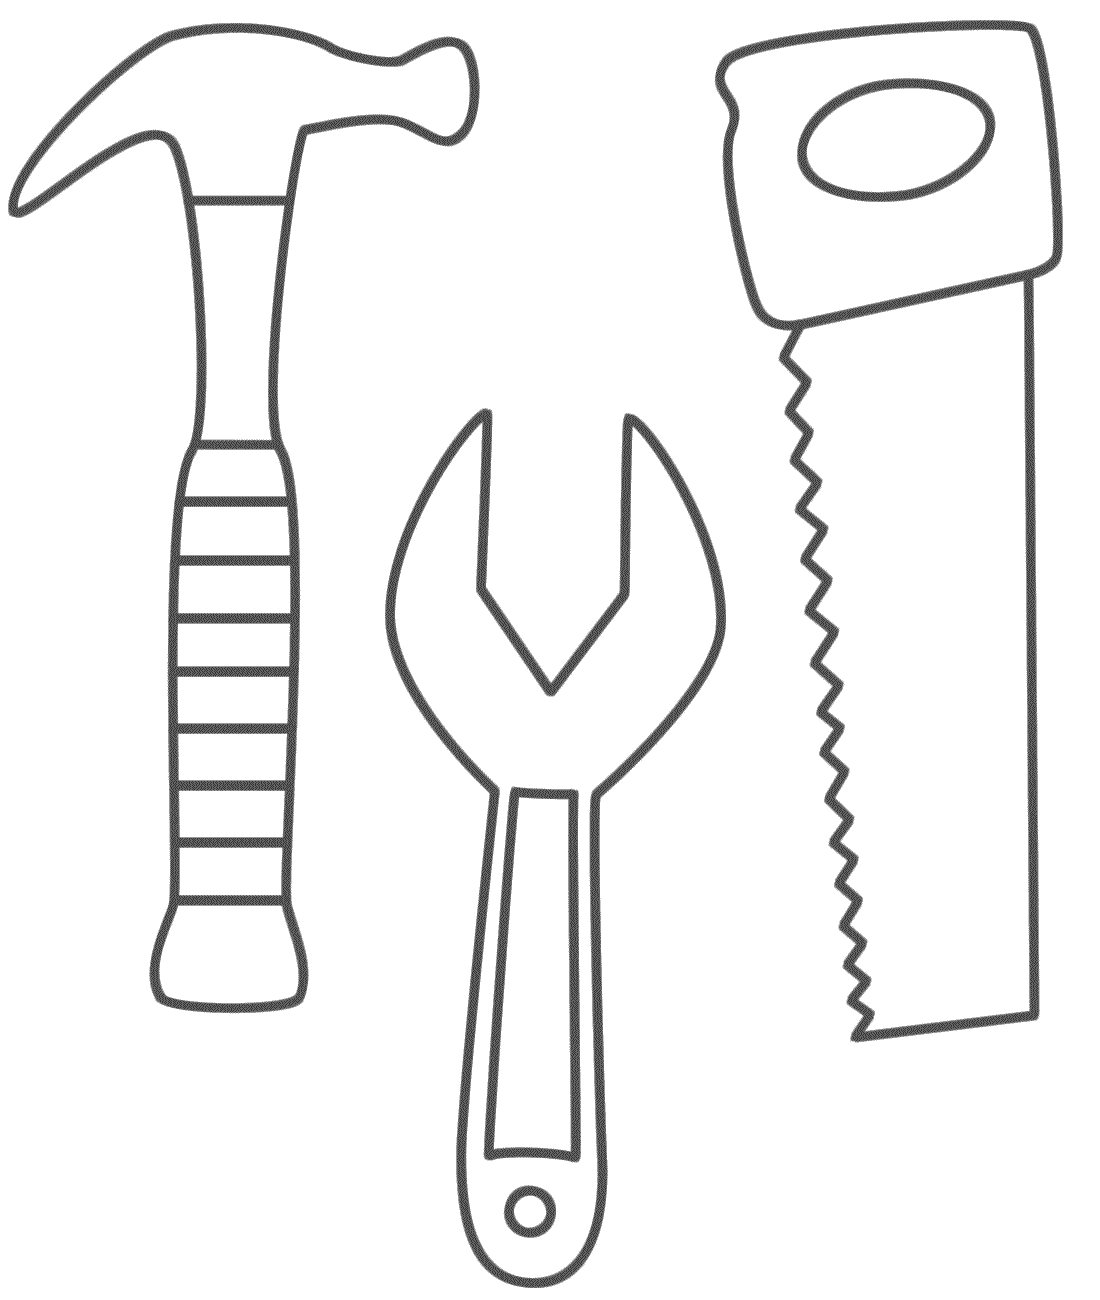 Hammer, Saw and Wrench